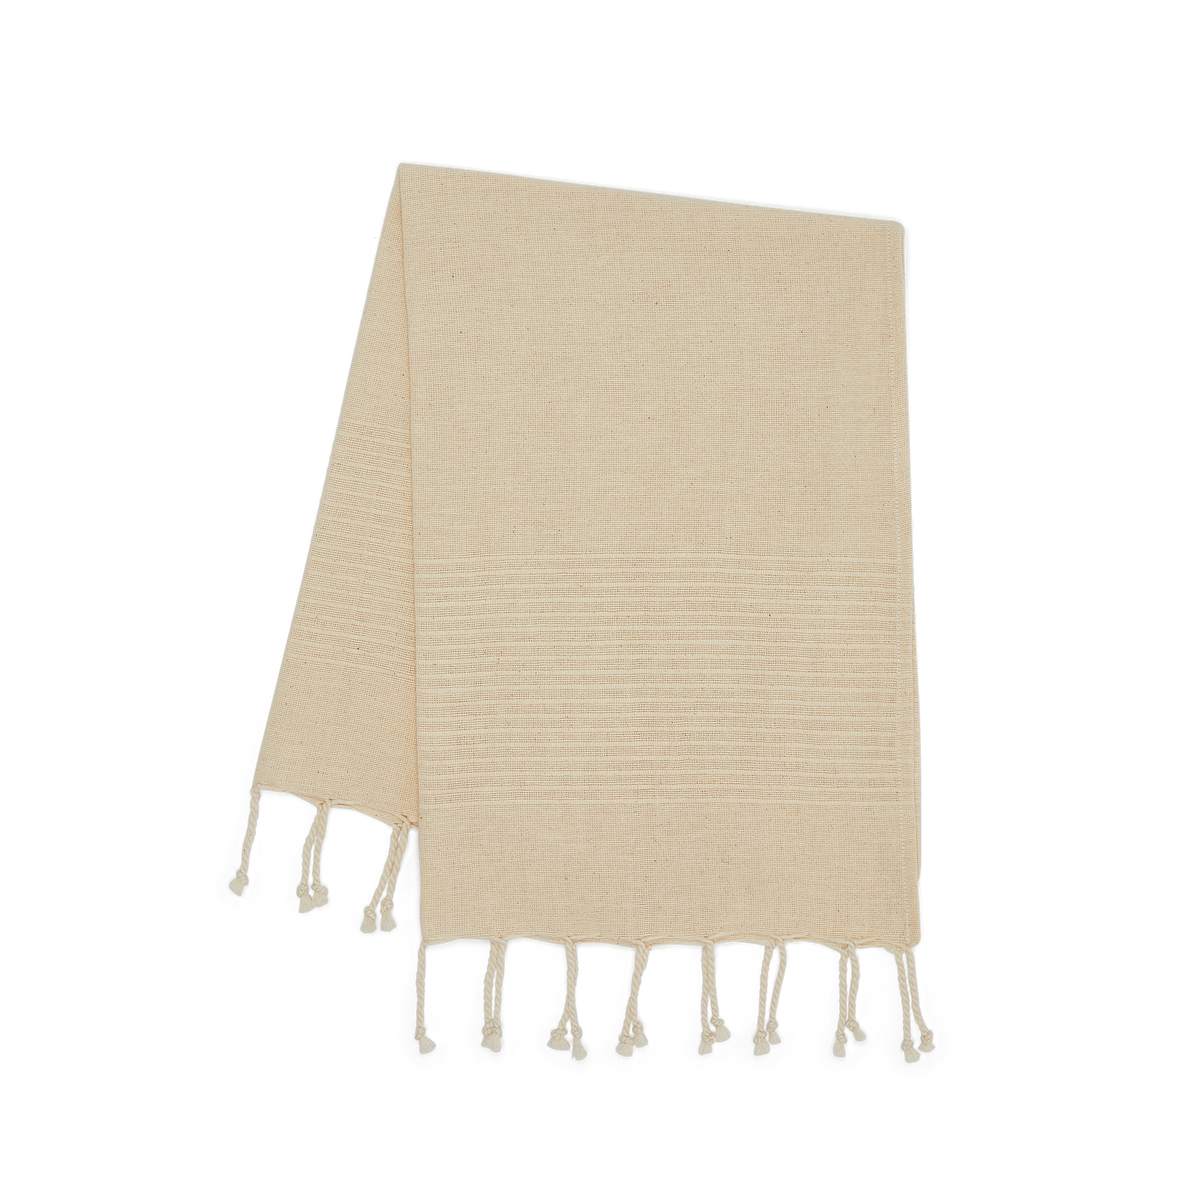 Product photo, showing organic cotton towel in it&#39;s natural color with edge fringing.